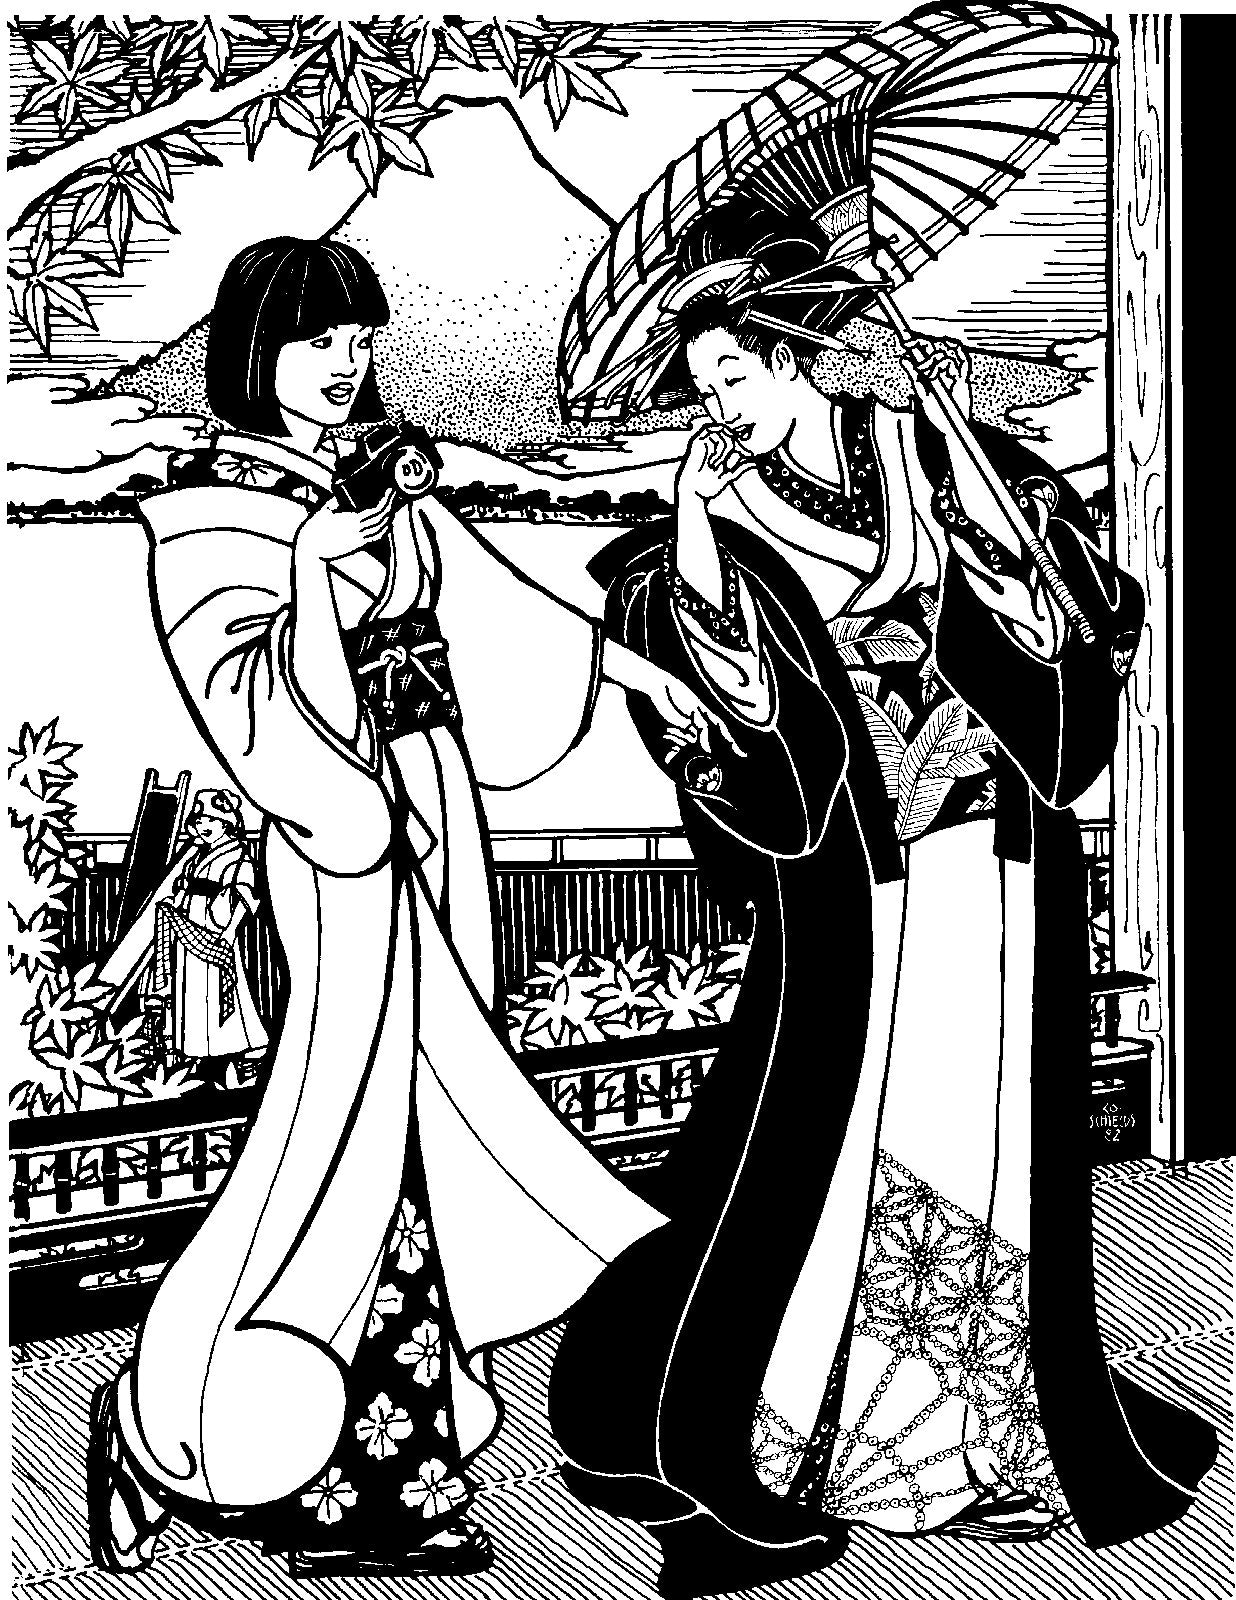 Black and white pen and ink drawing by Gretchen Shields.  Two women standing together in traditional formal kimono and casual kimono. 